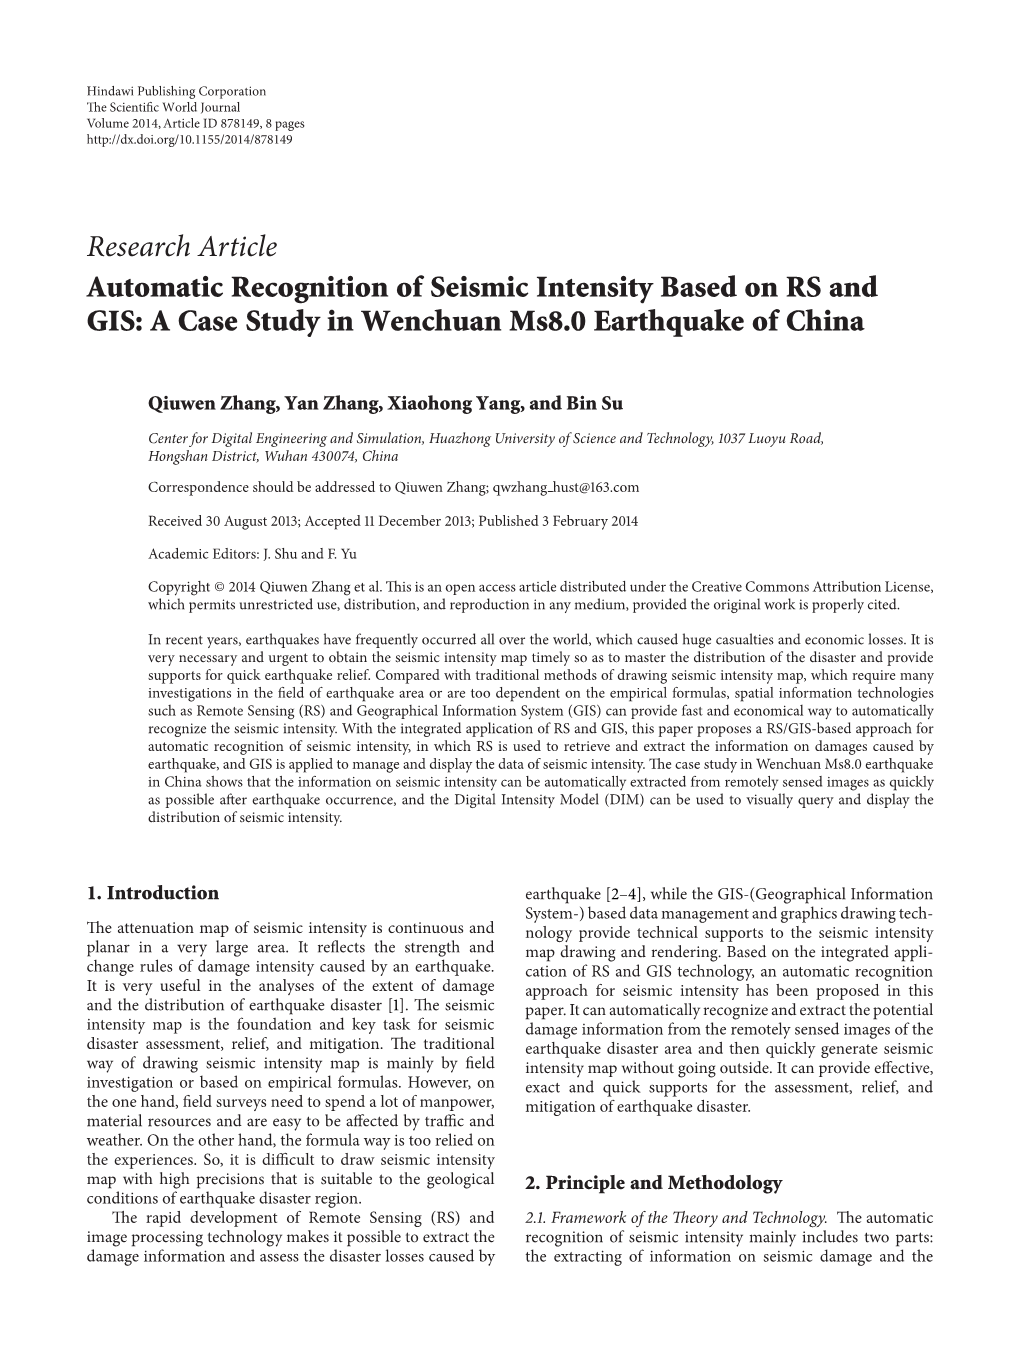 Automatic Recognition of Seismic Intensity Based on RS and GIS: a Case Study in Wenchuan Ms8.0 Earthquake of China